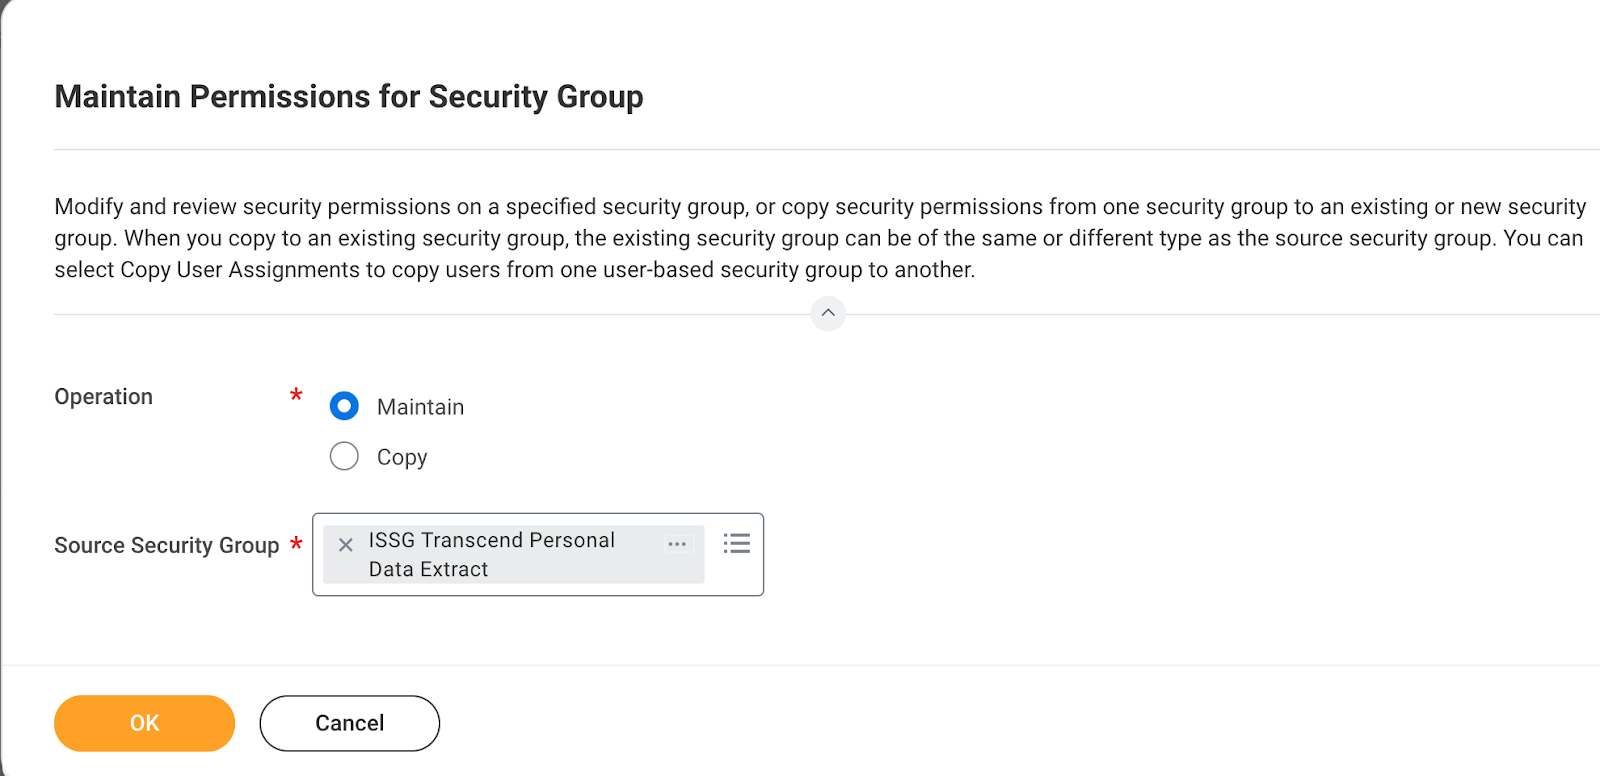 Example of "Maintain Permissions for Security Group"